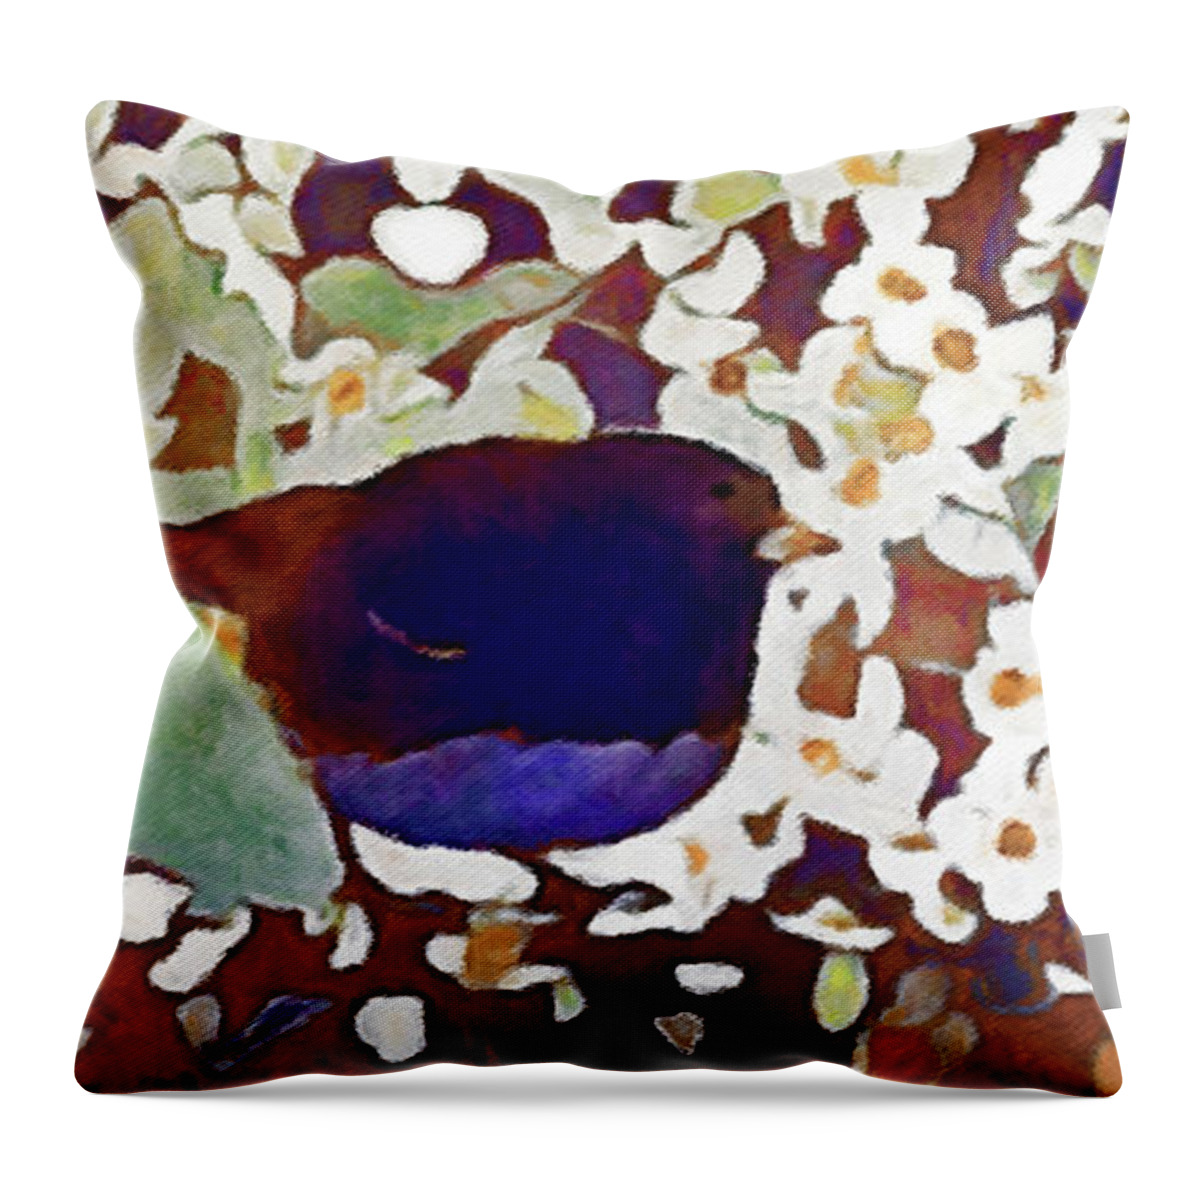 Celebrate Spring Throw Pillow featuring the digital art Celebrate Spring by Susan Maxwell Schmidt